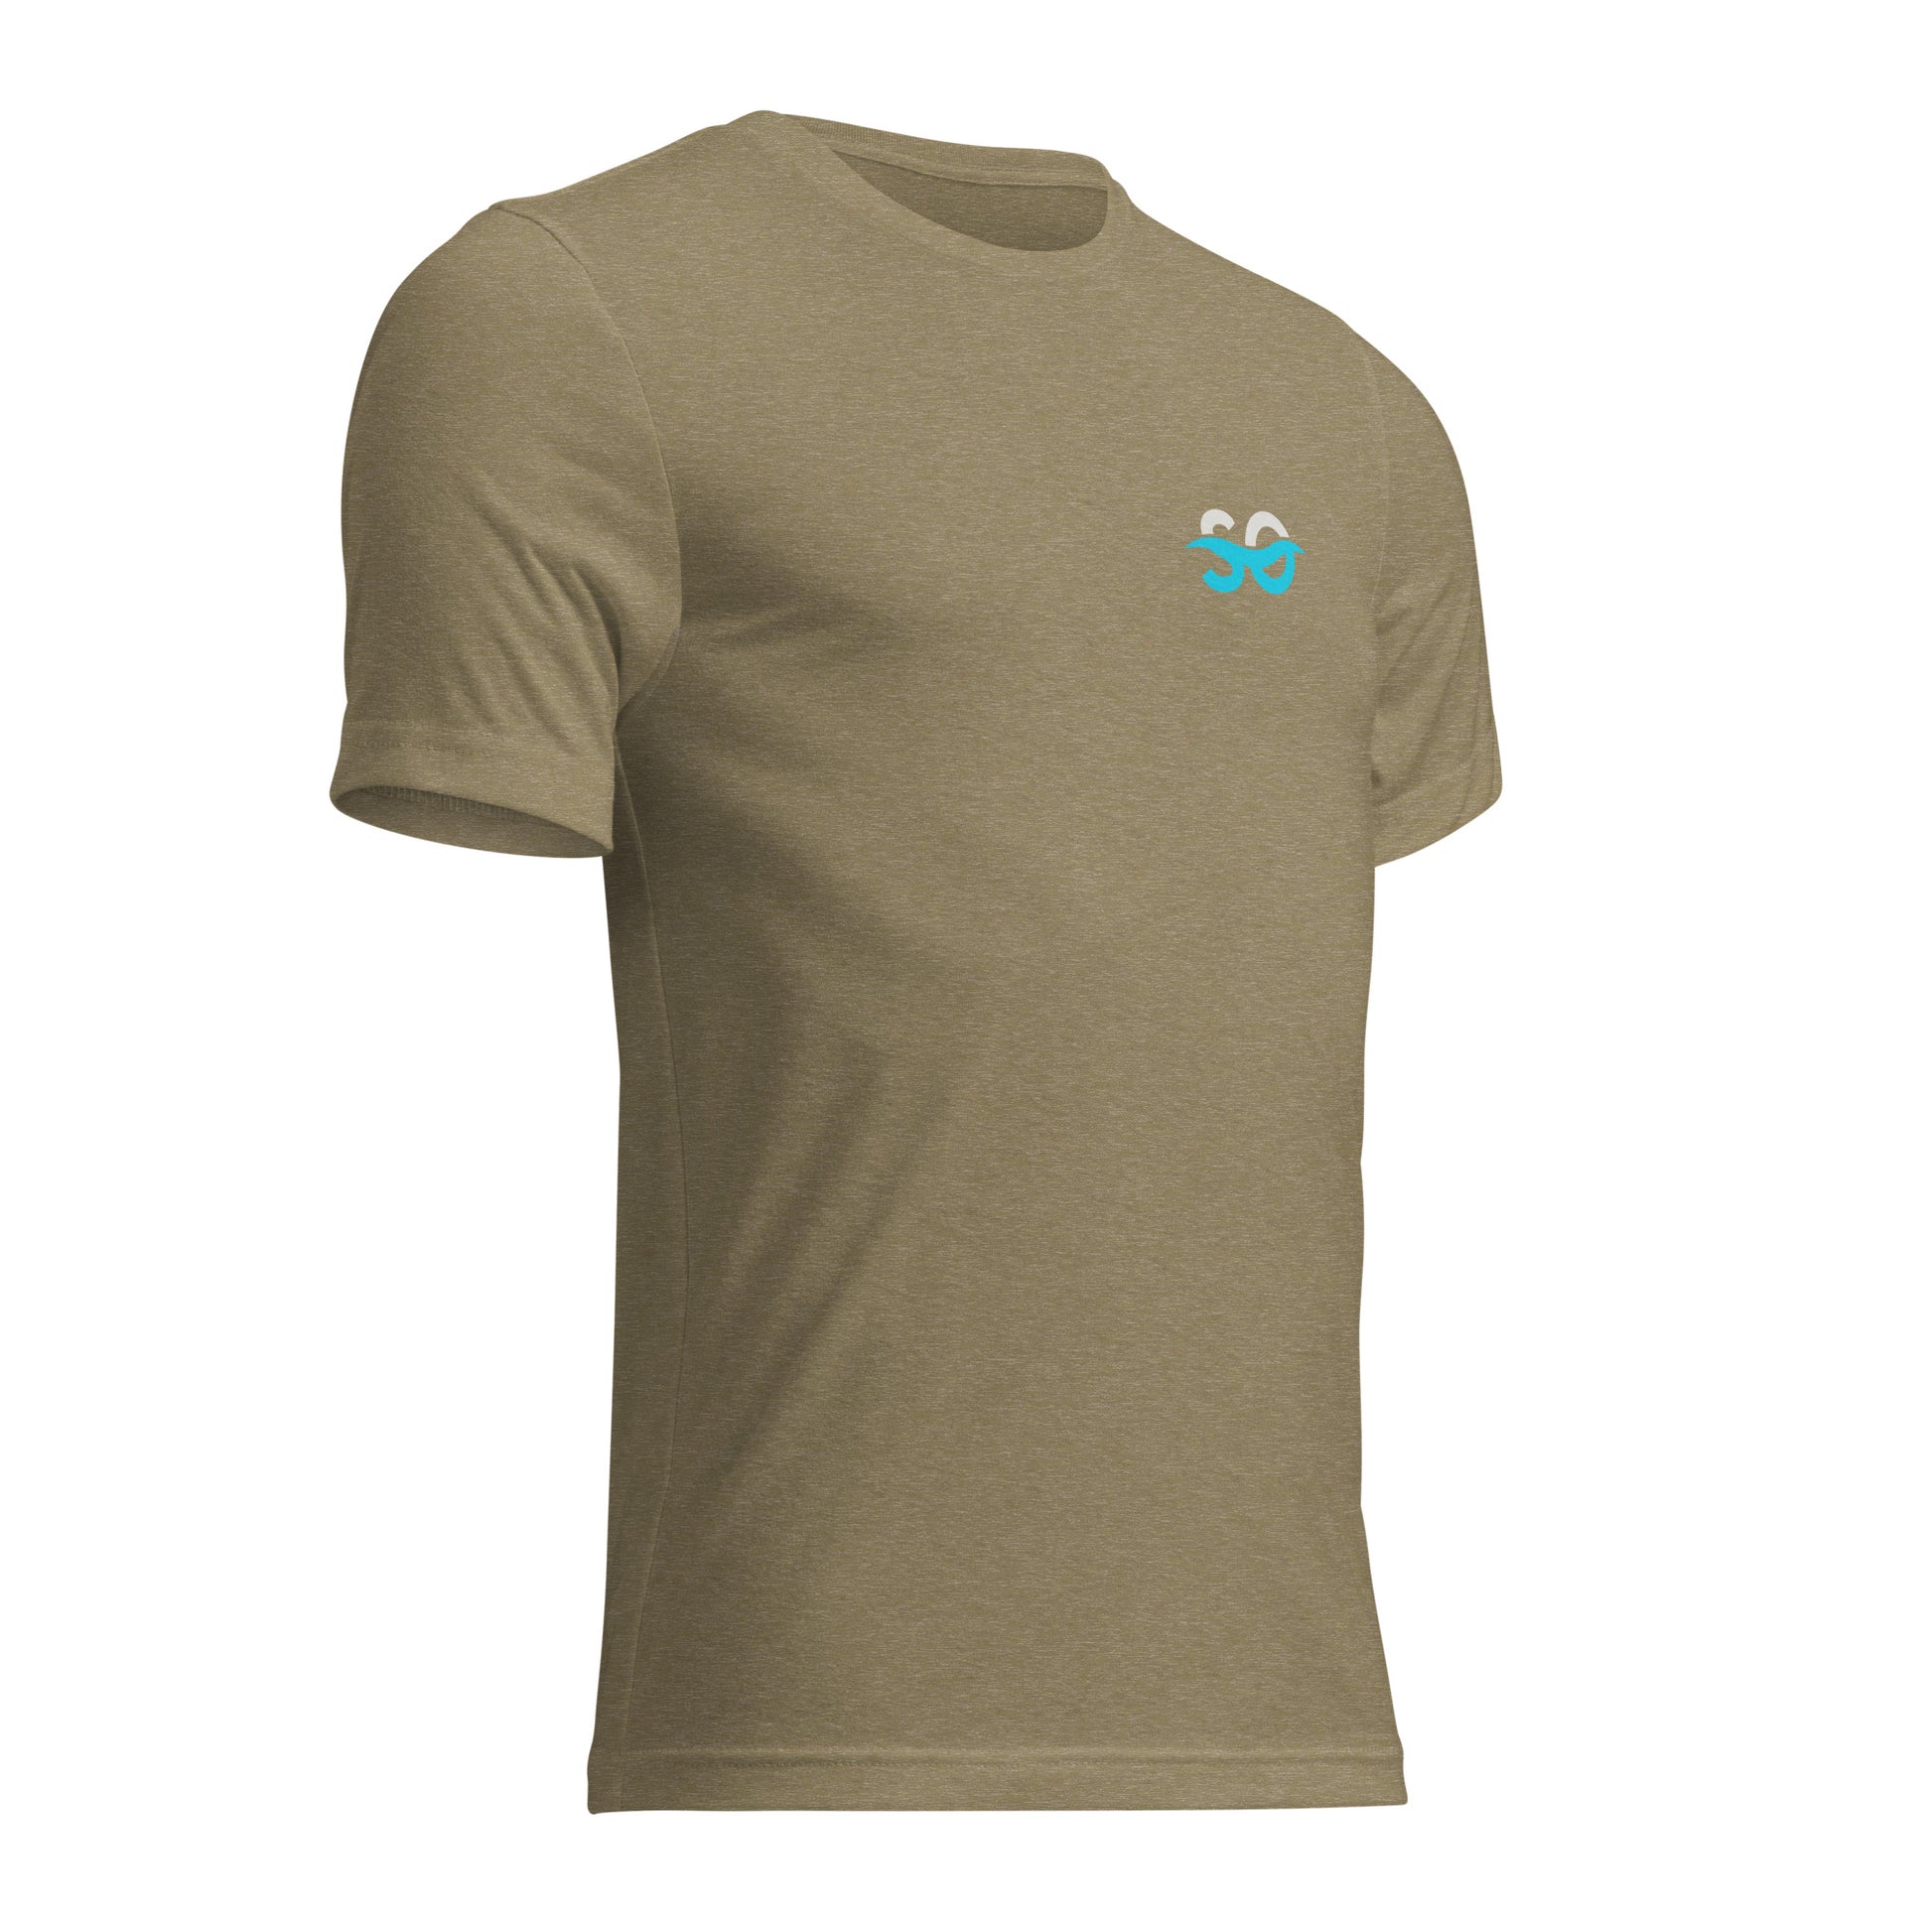 a tan shirt with a blue logo on the chest